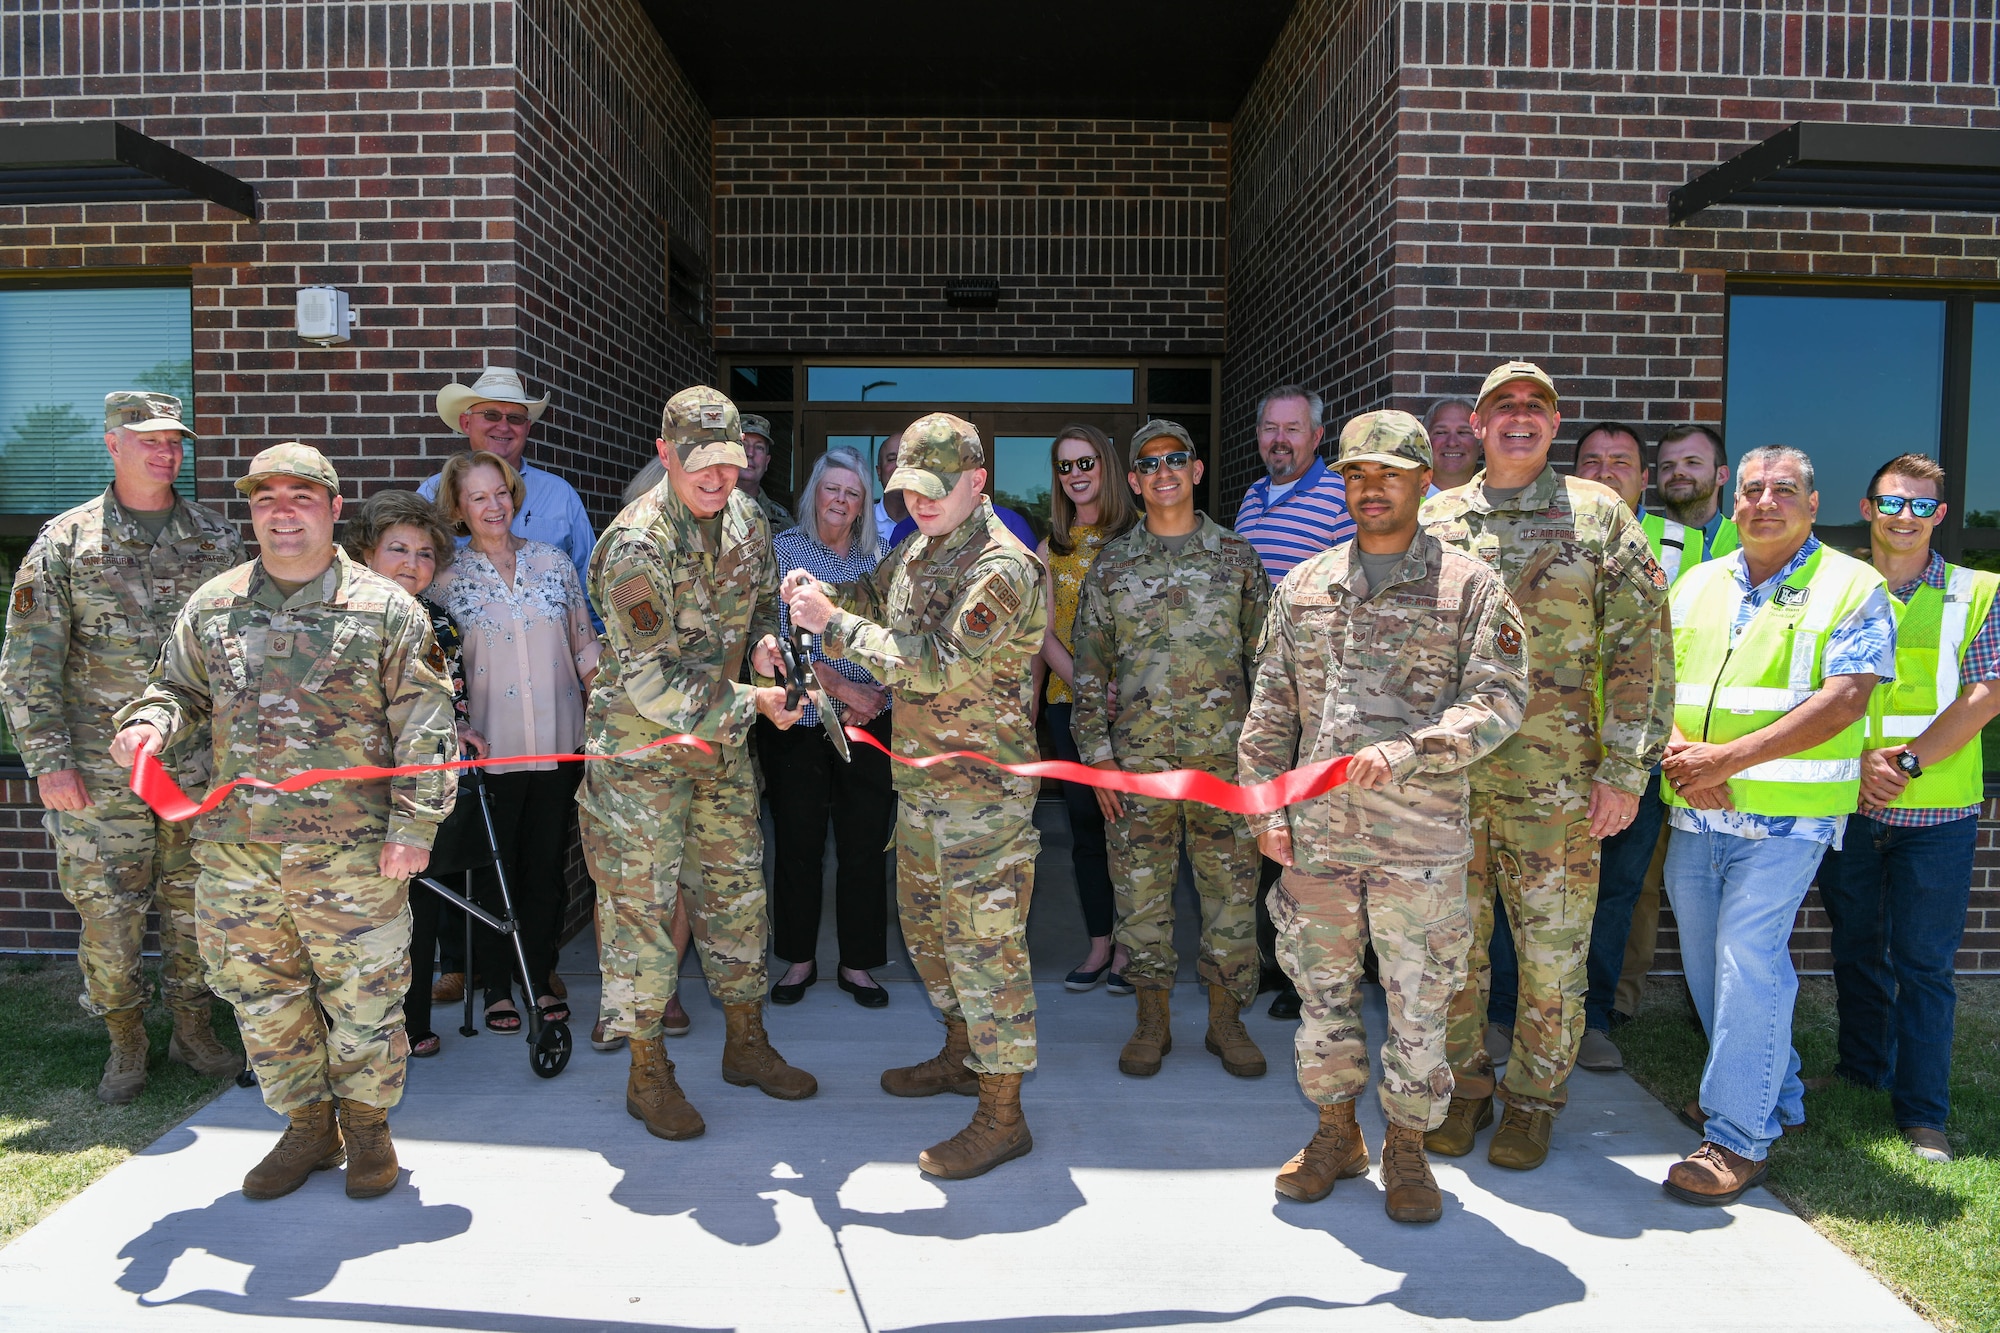 U.S. Air Force Col. Blaine Baker (center left), 97th Air Mobility Wing commander, and Airman Evin Hughes, 97th Communications Squadron network operations technician, cut a ribbon to celebrate the completion of a new dormitory at Altus Air Force Base, Oklahoma, June 13, 2022. The new dorm cost an estimated $24.6 million and will support 116 permanent-party Airmen. (U.S. Air Force photo by Airman 1st Class Trenton Jancze)